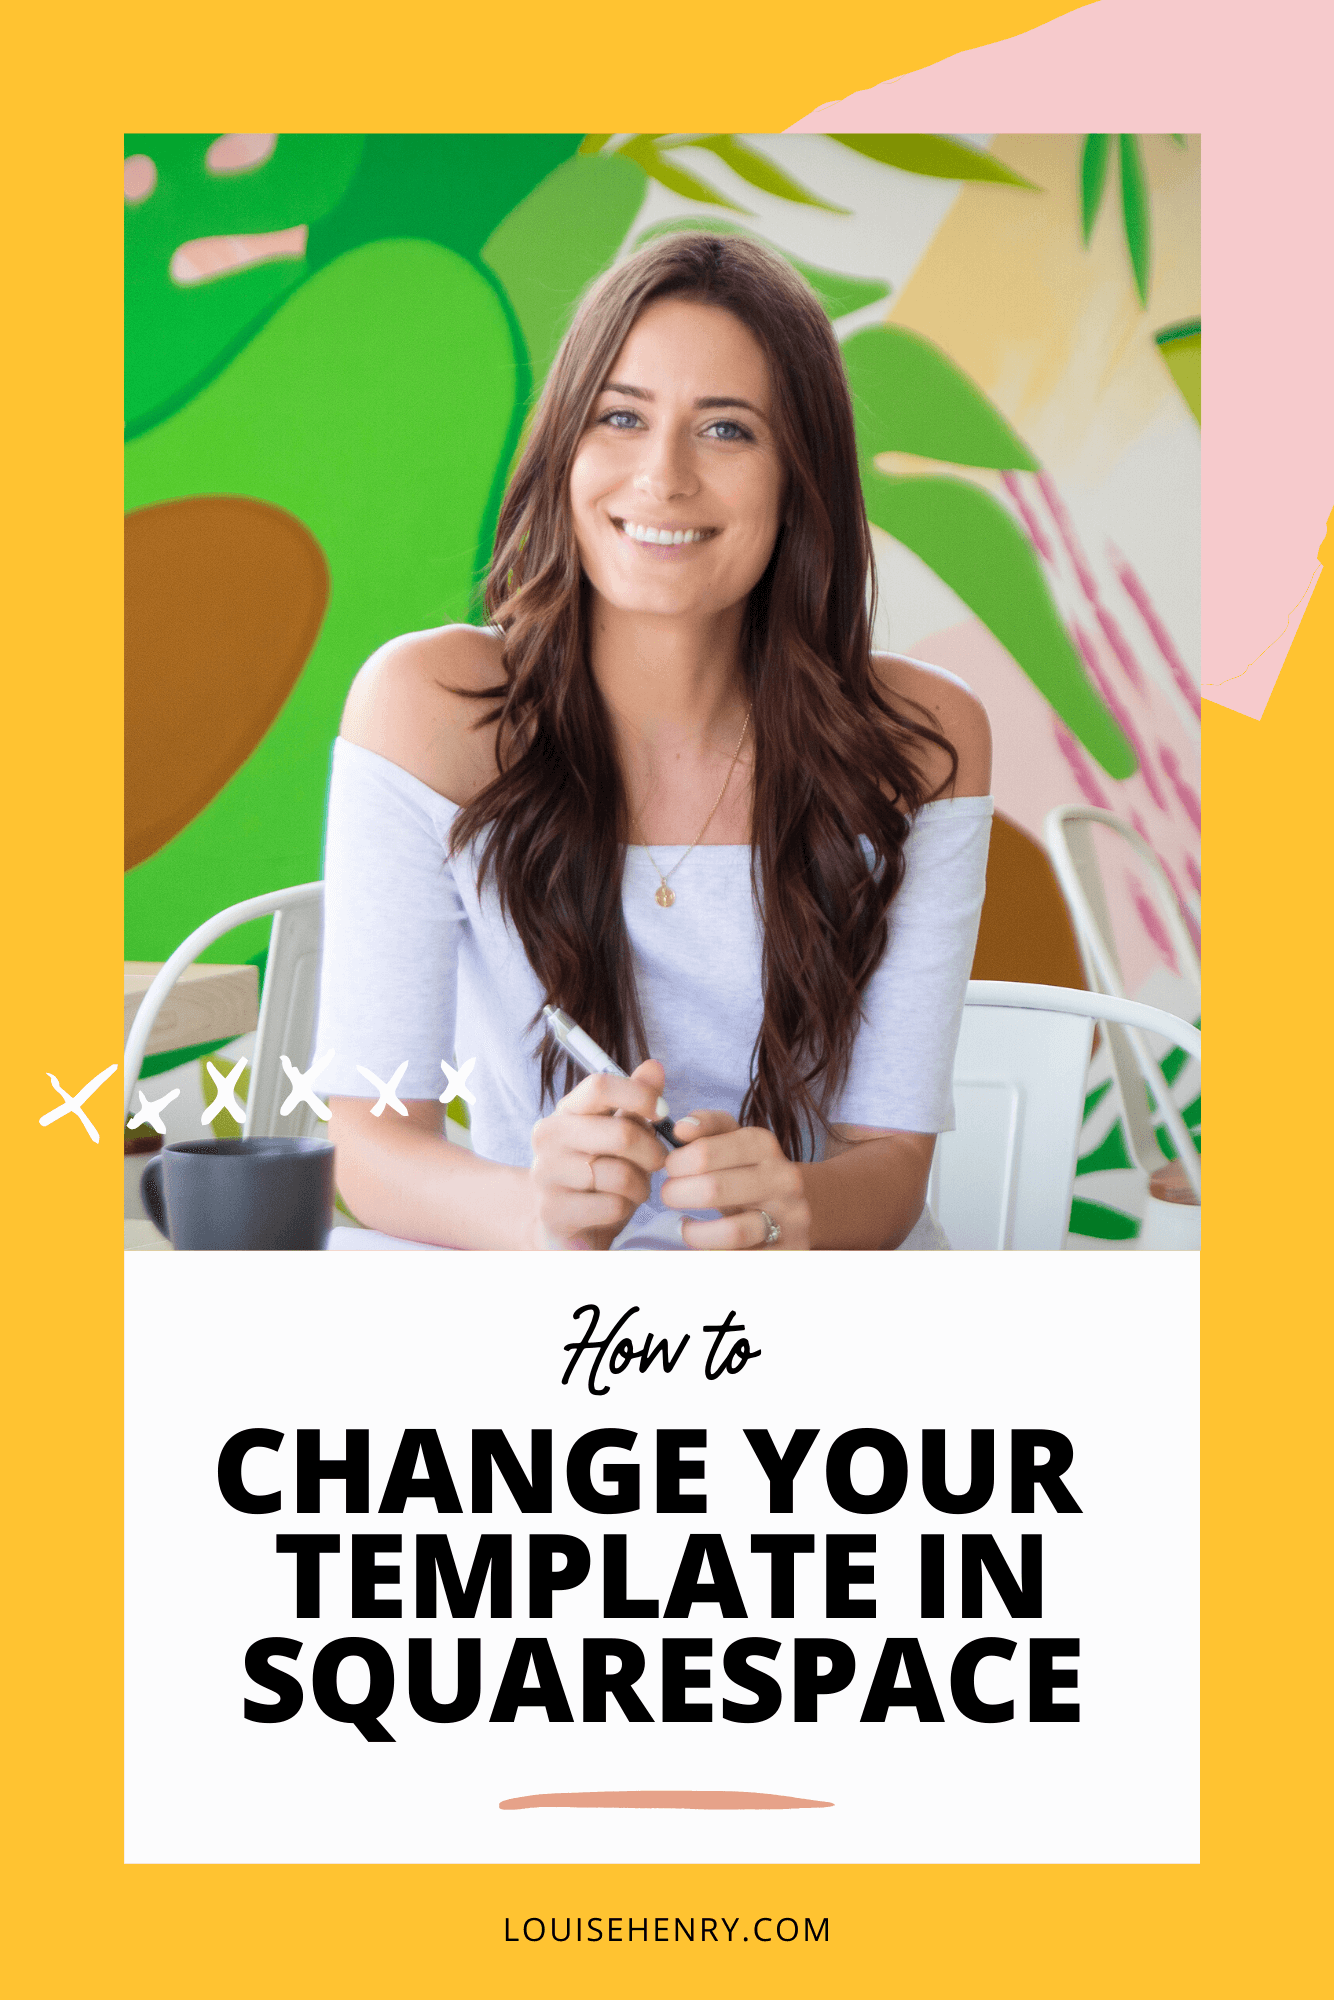 how-to-change-templates-in-squarespace-version-7-0-louise-henry